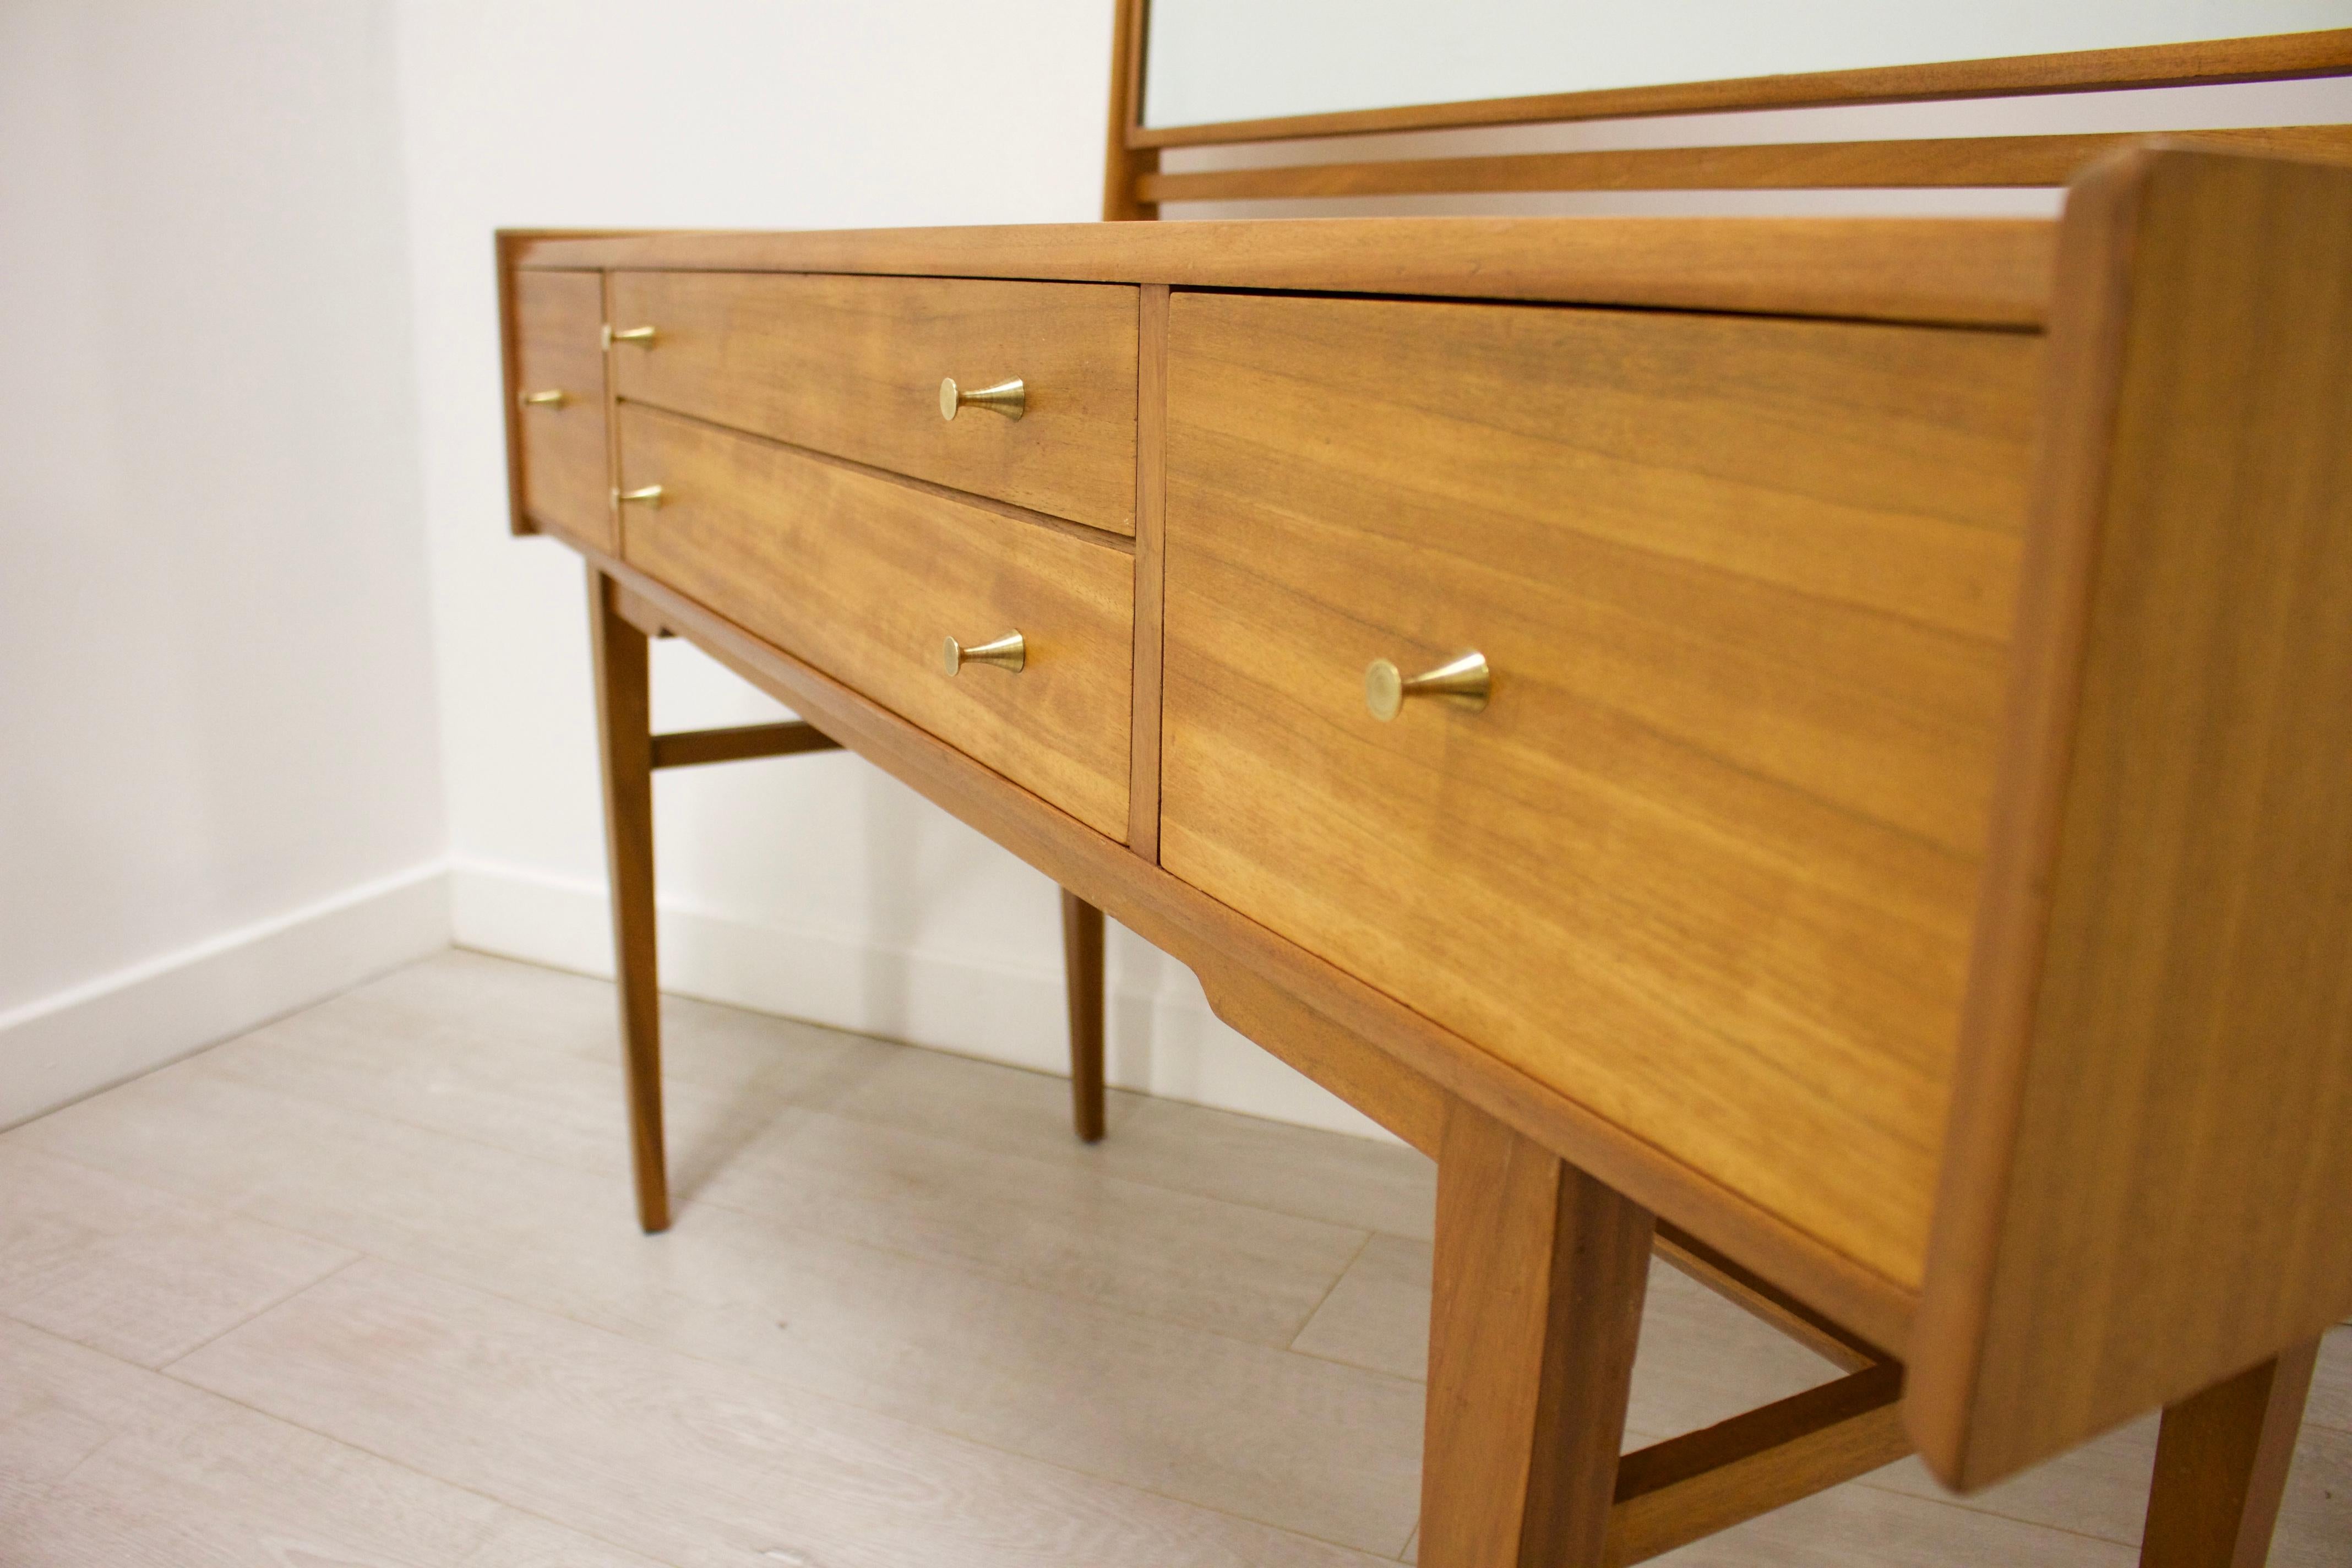 British Midcentury Walnut Dressing Table from a. Younger Ltd., 1960s